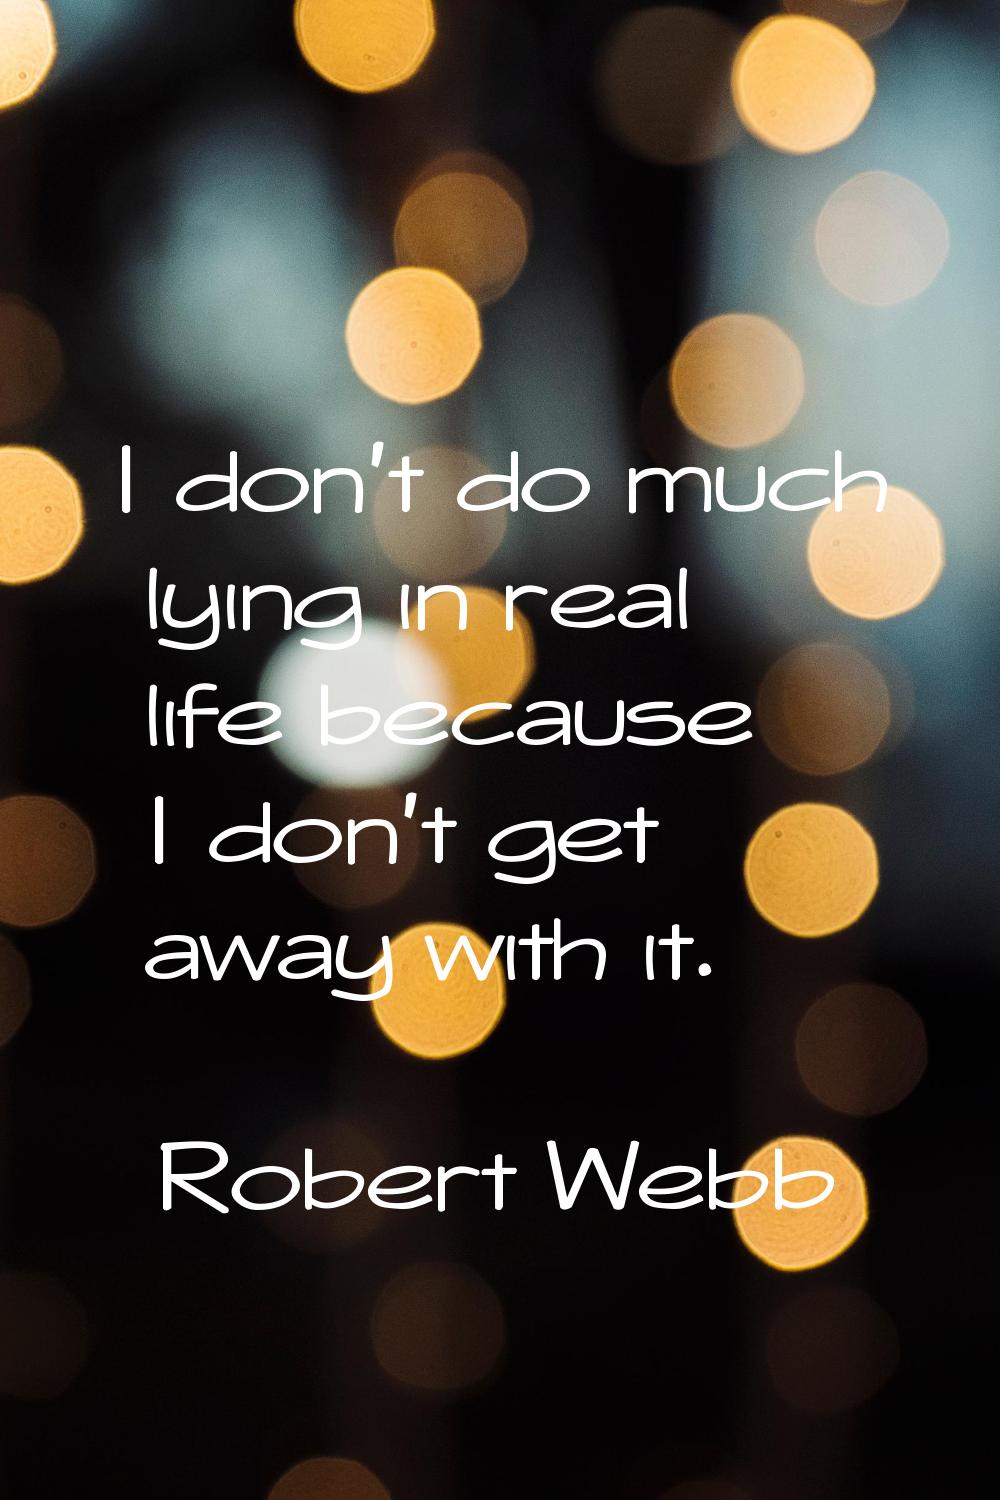 I don't do much lying in real life because I don't get away with it.